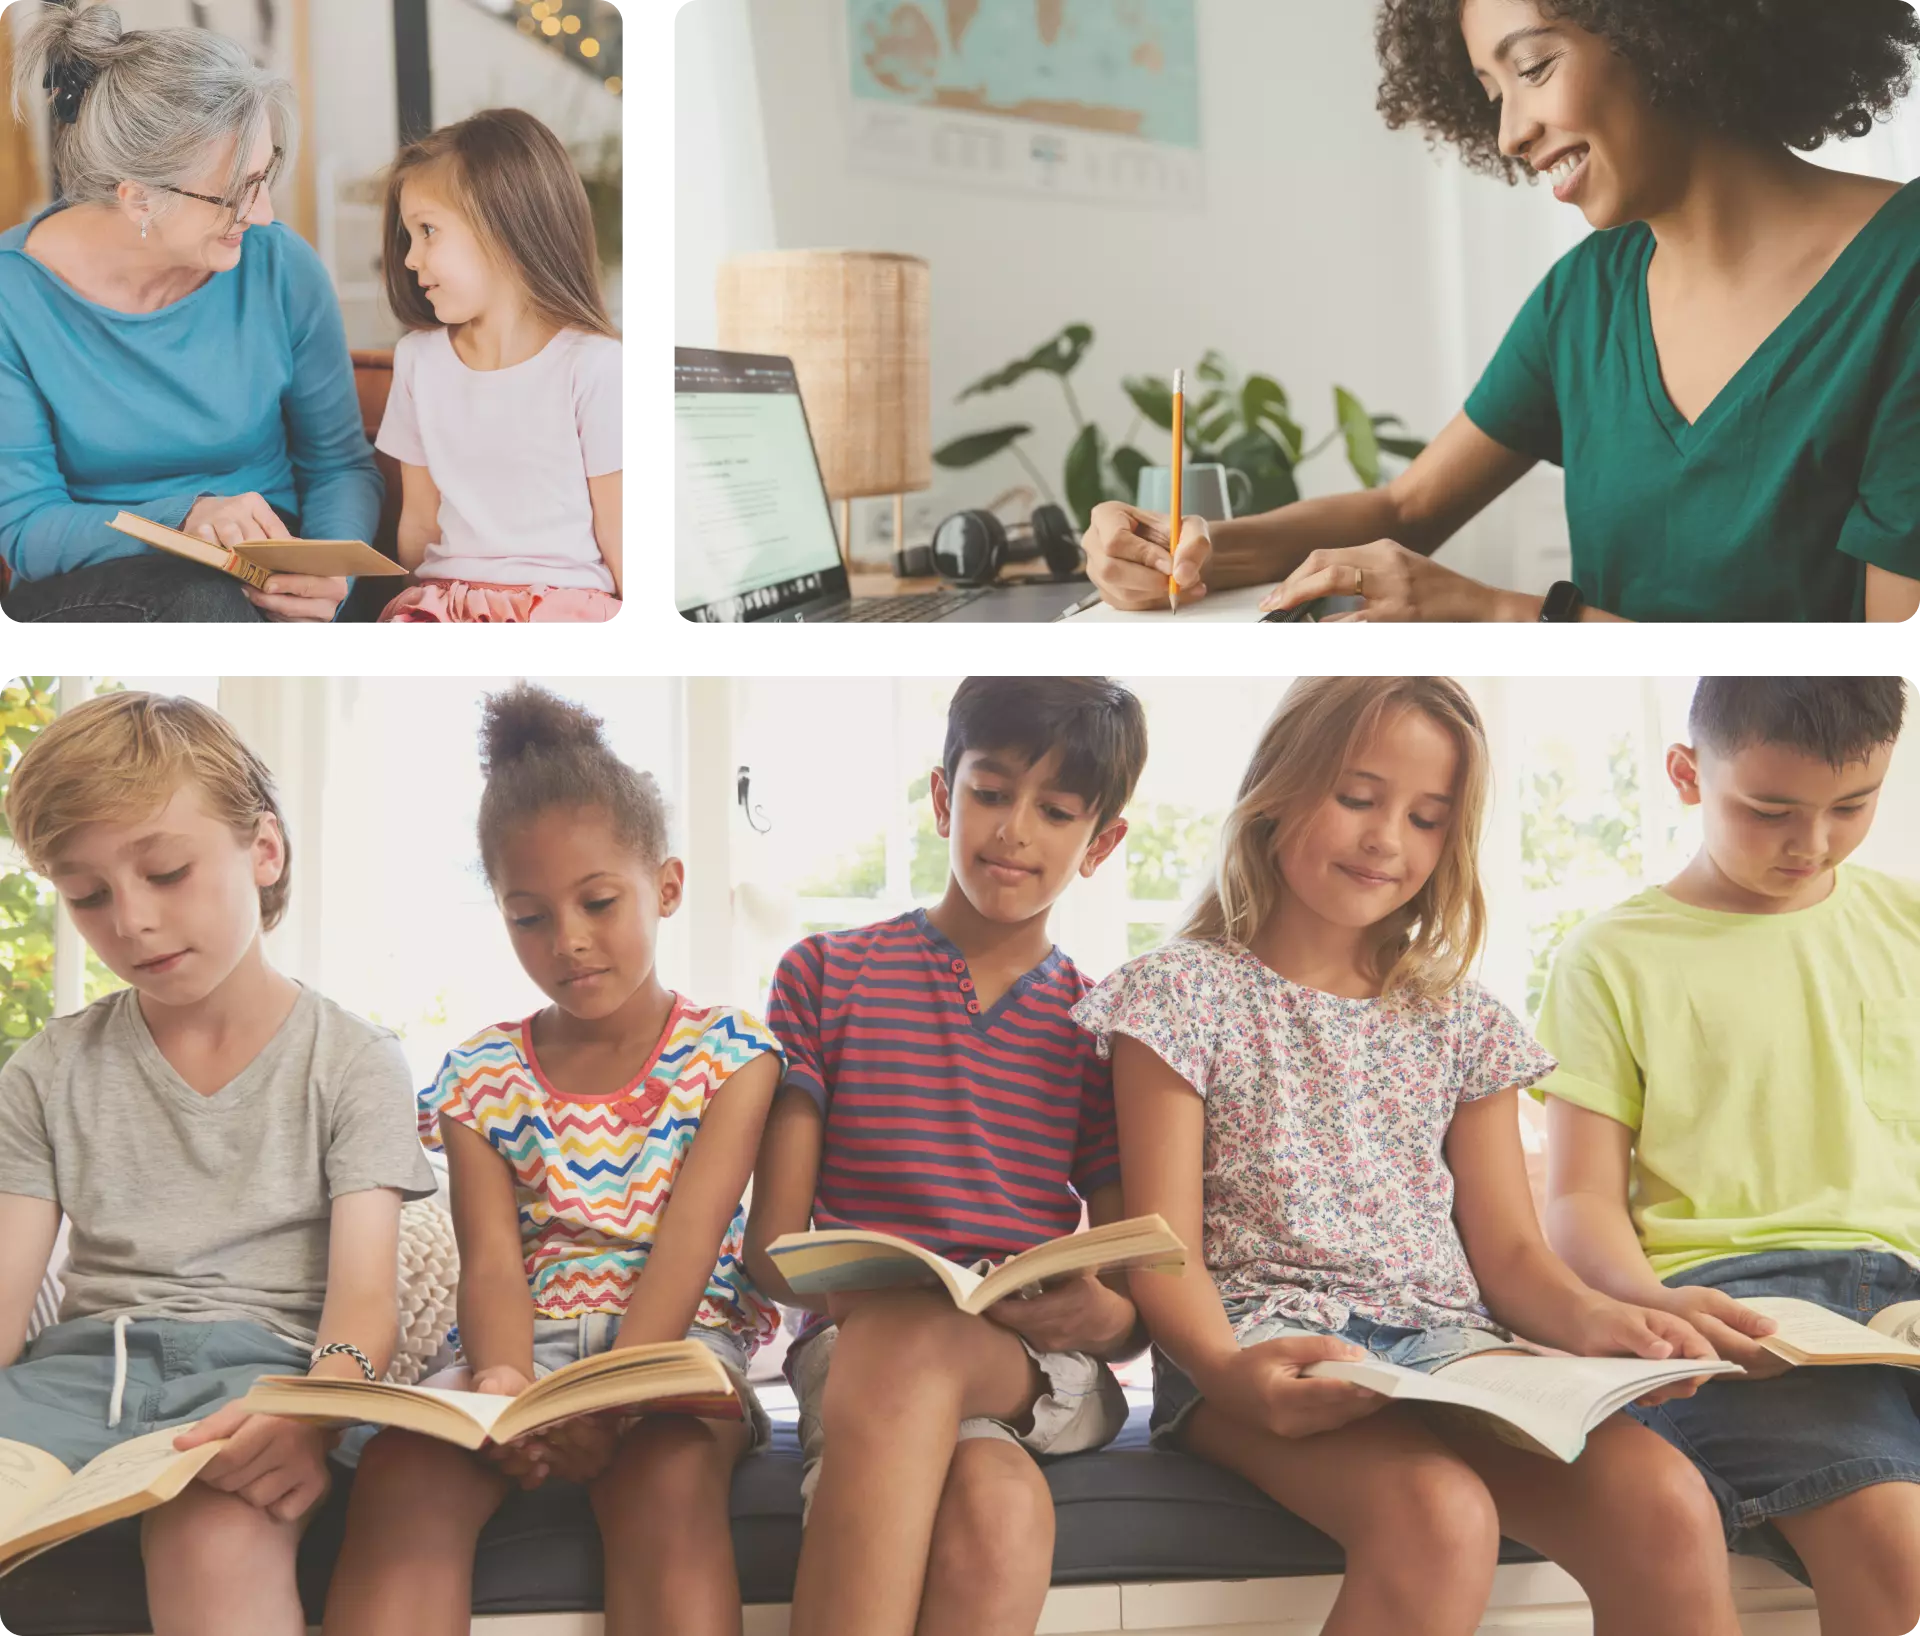 Infographic signifies 3 images of American children and families, reading and learning.